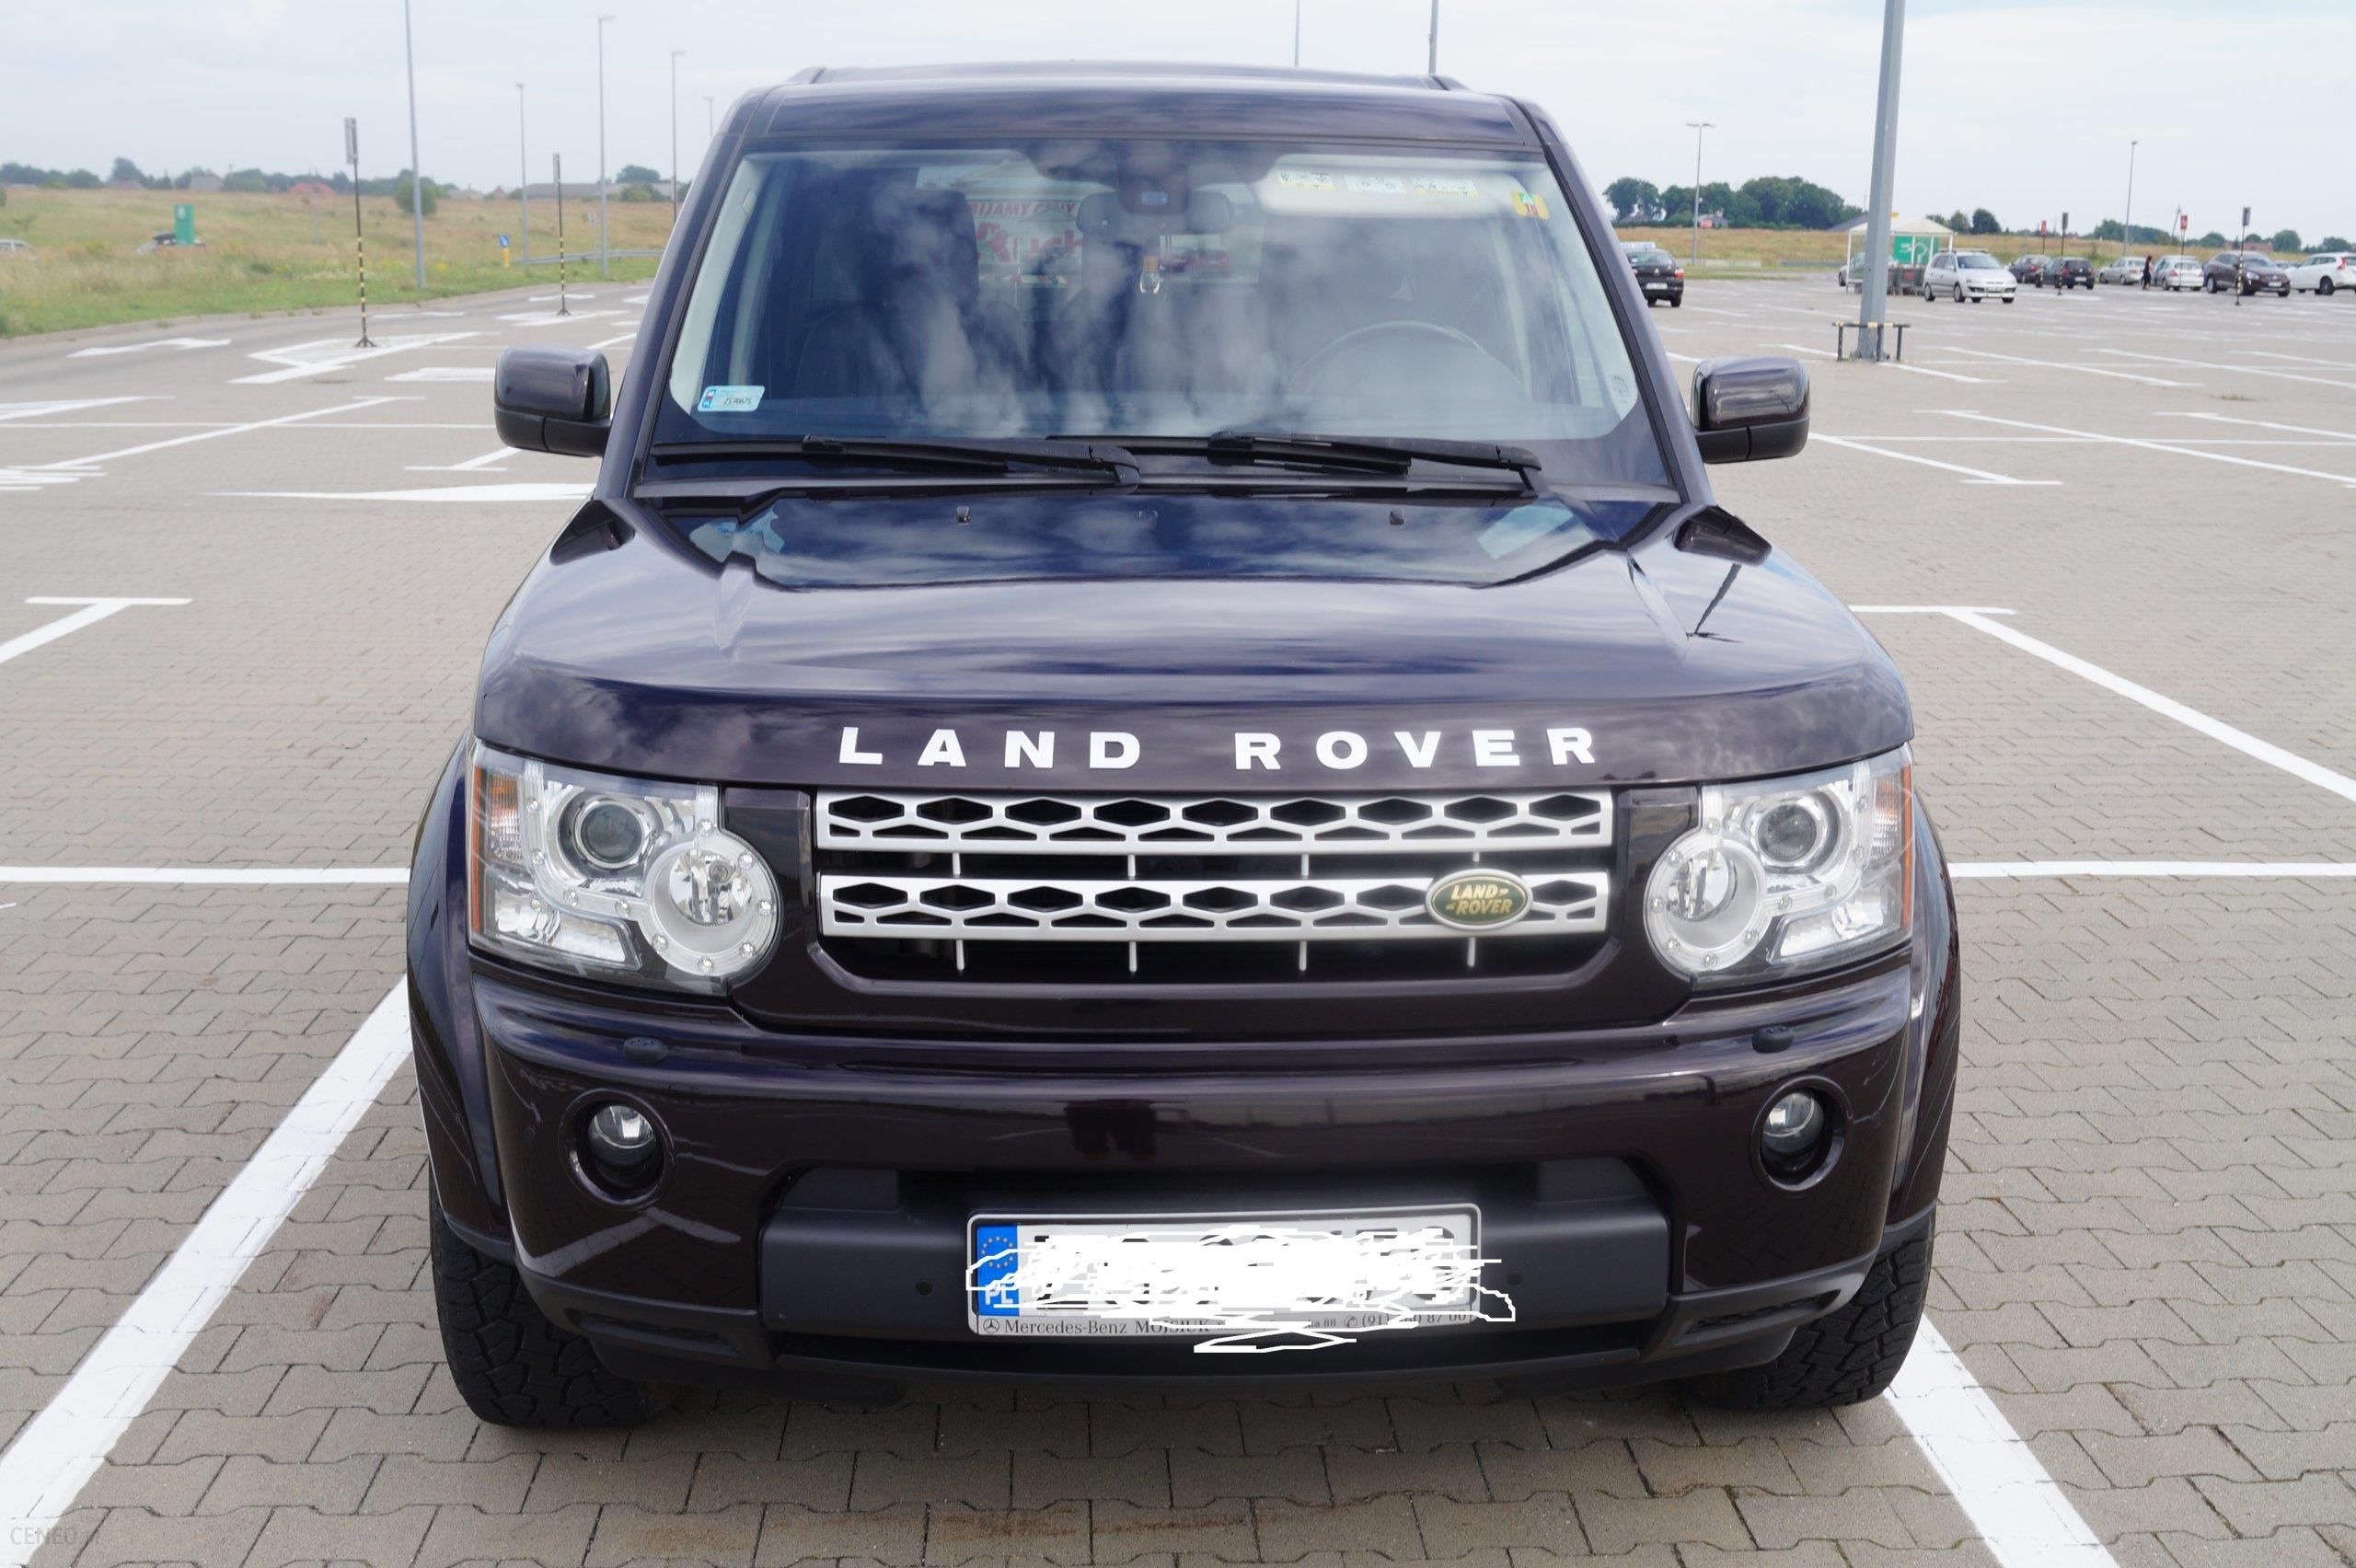 Land Rover Discovery IV 2010 diesel 190KM terenowy brązowy